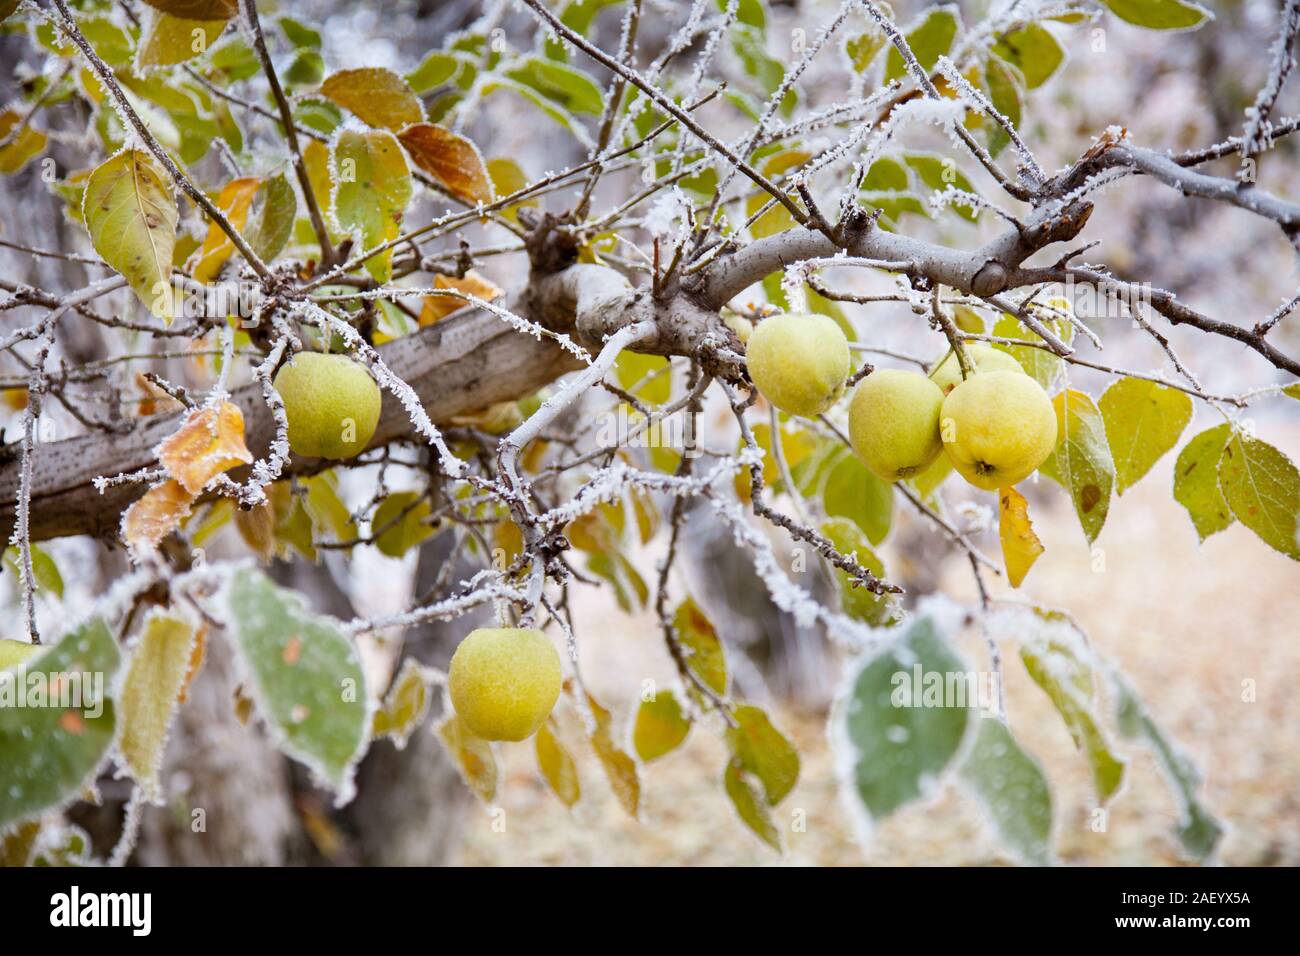 A golden delicious apple orchard in winter with apples and autumn leaves still on the tree in Washington state Stock Photo